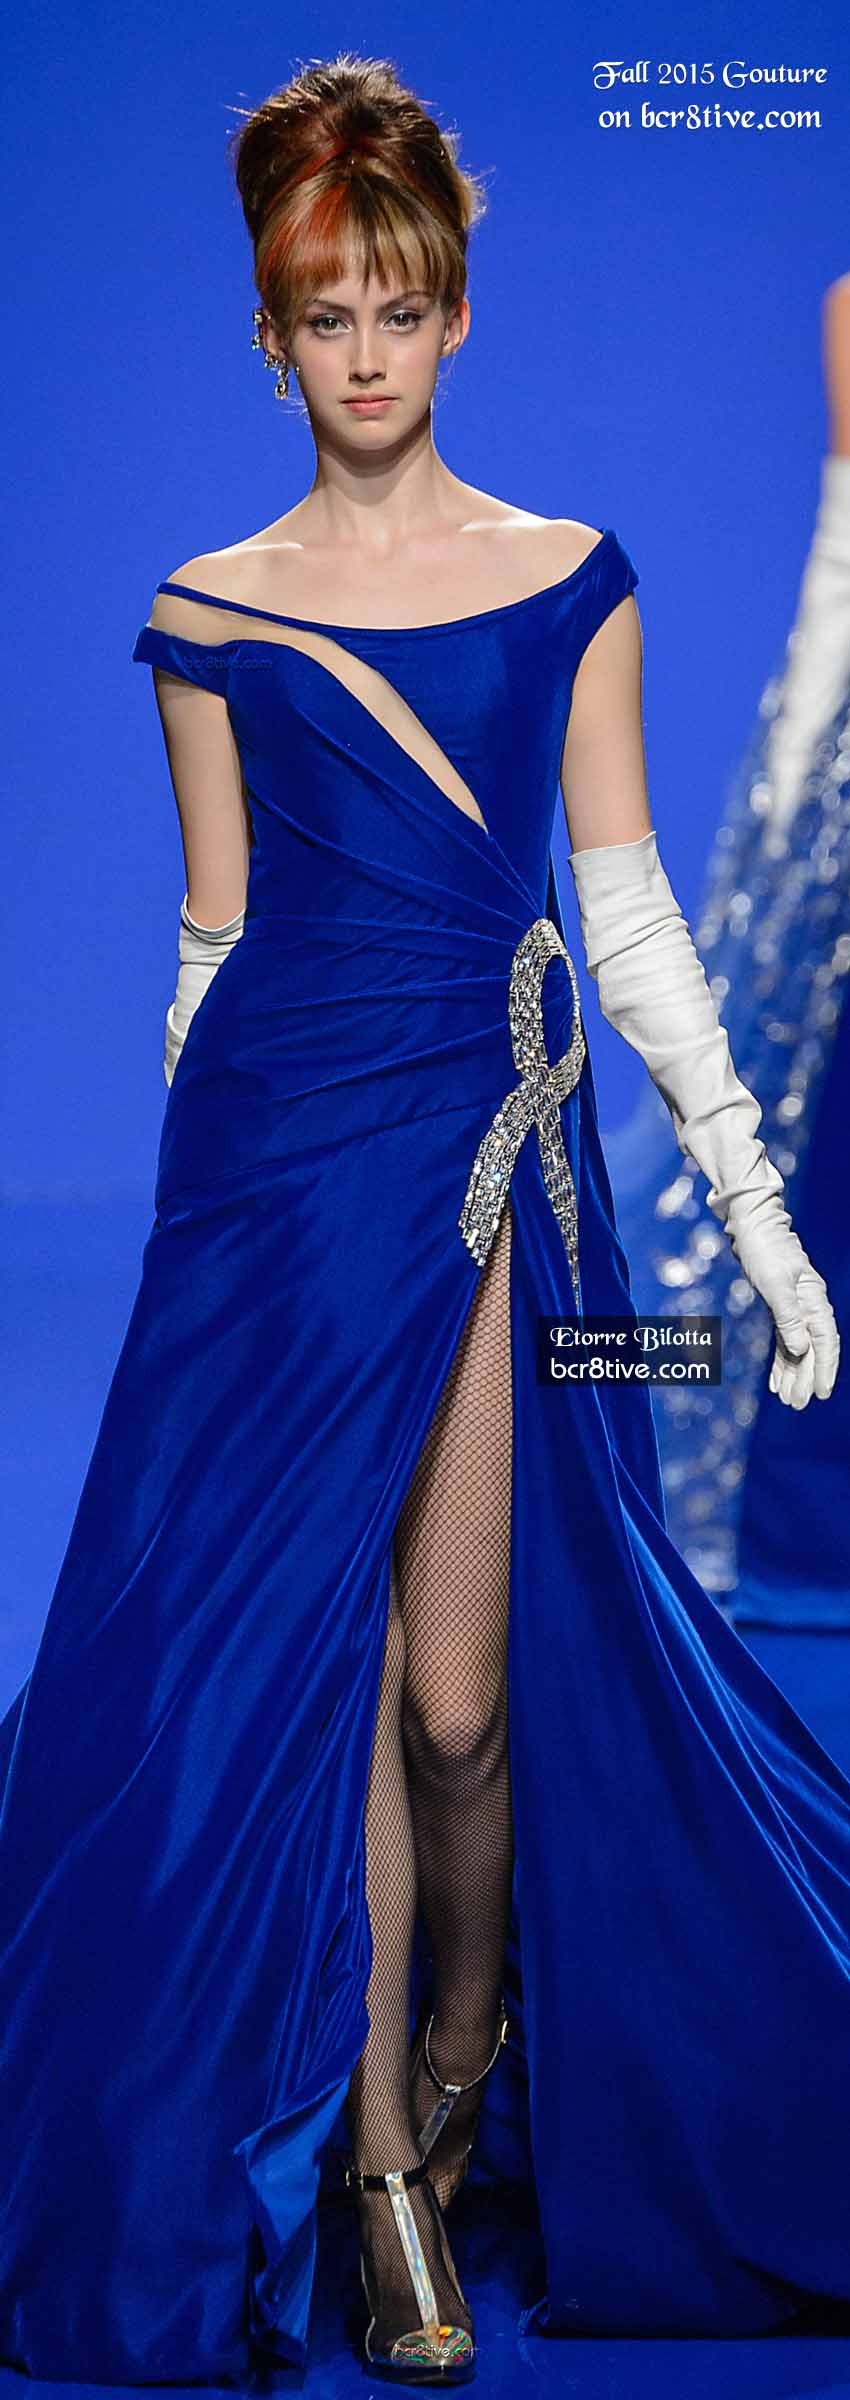 Georges Chakra Couture Fall 2015-16